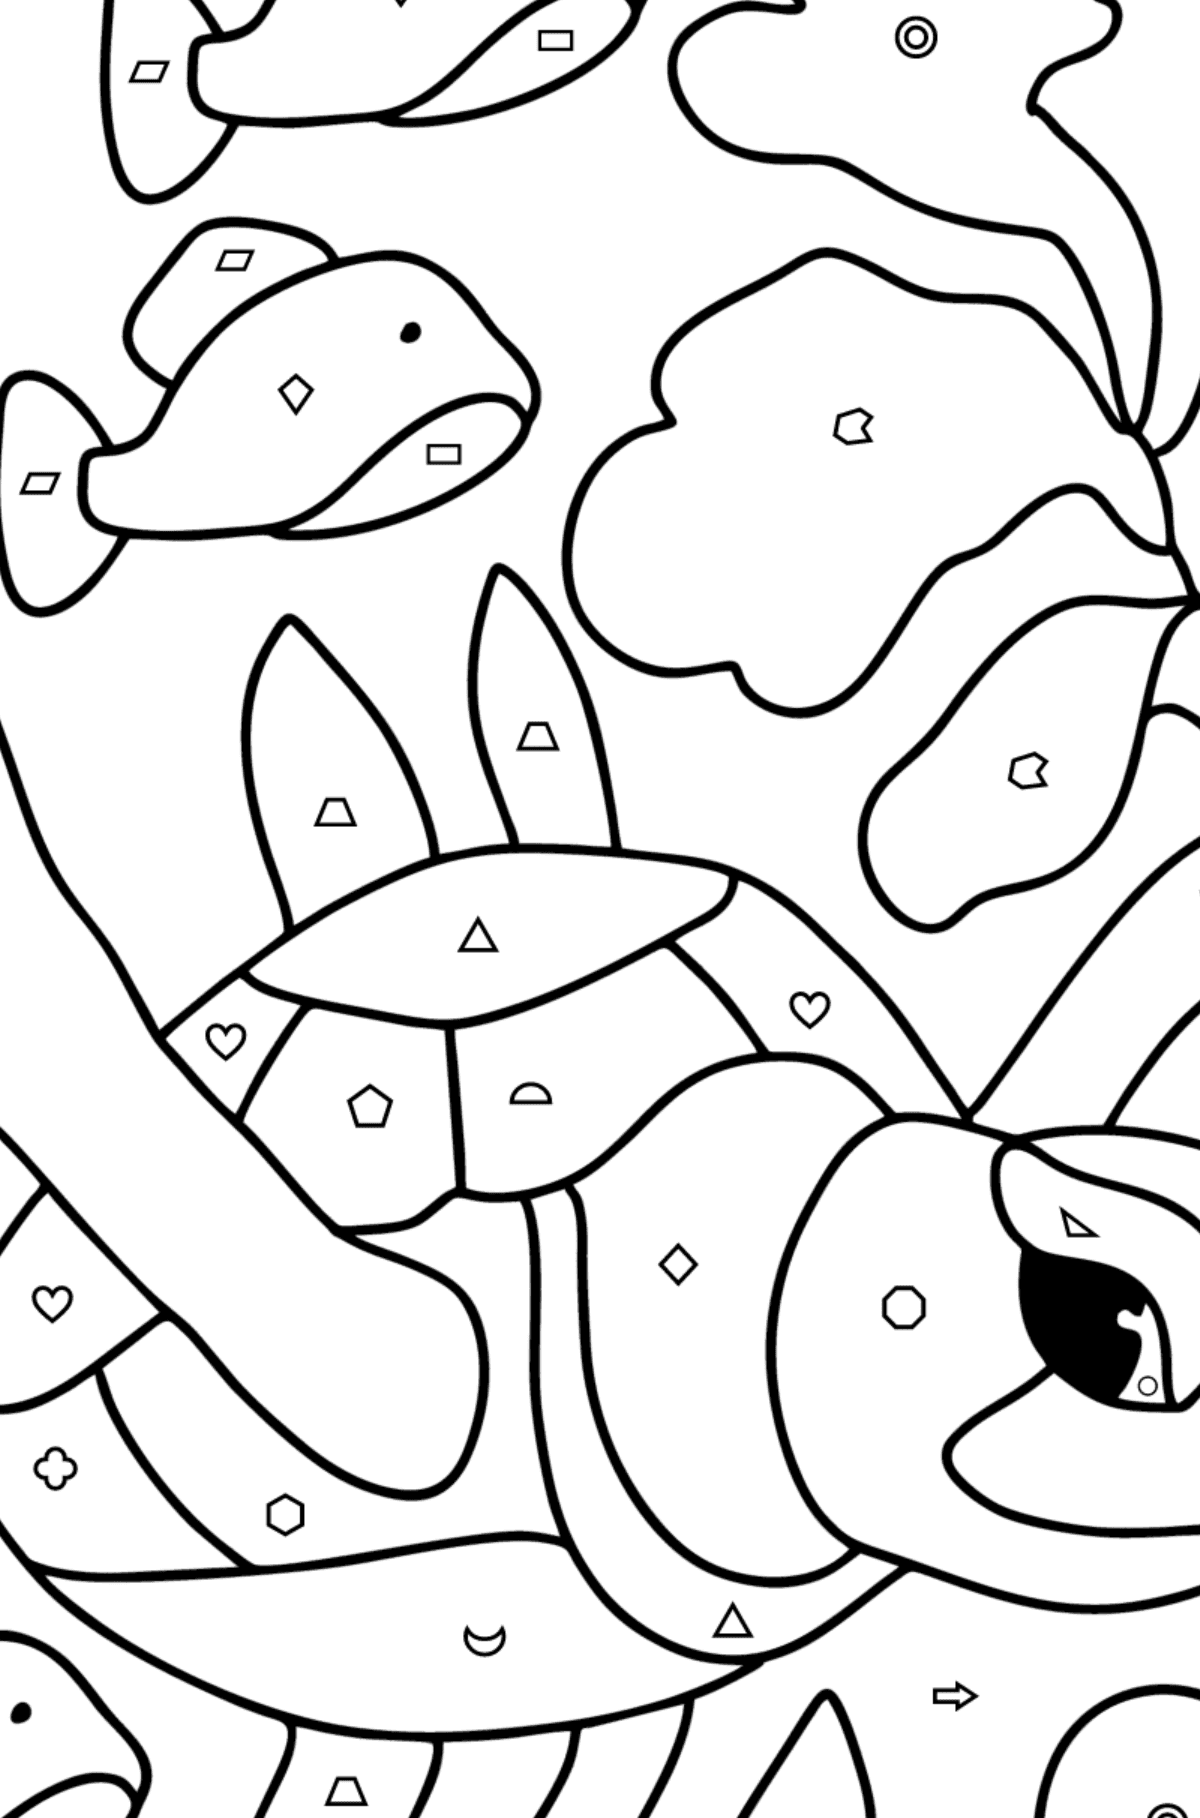 Sea turtle coloring page - Coloring by Geometric Shapes for Kids